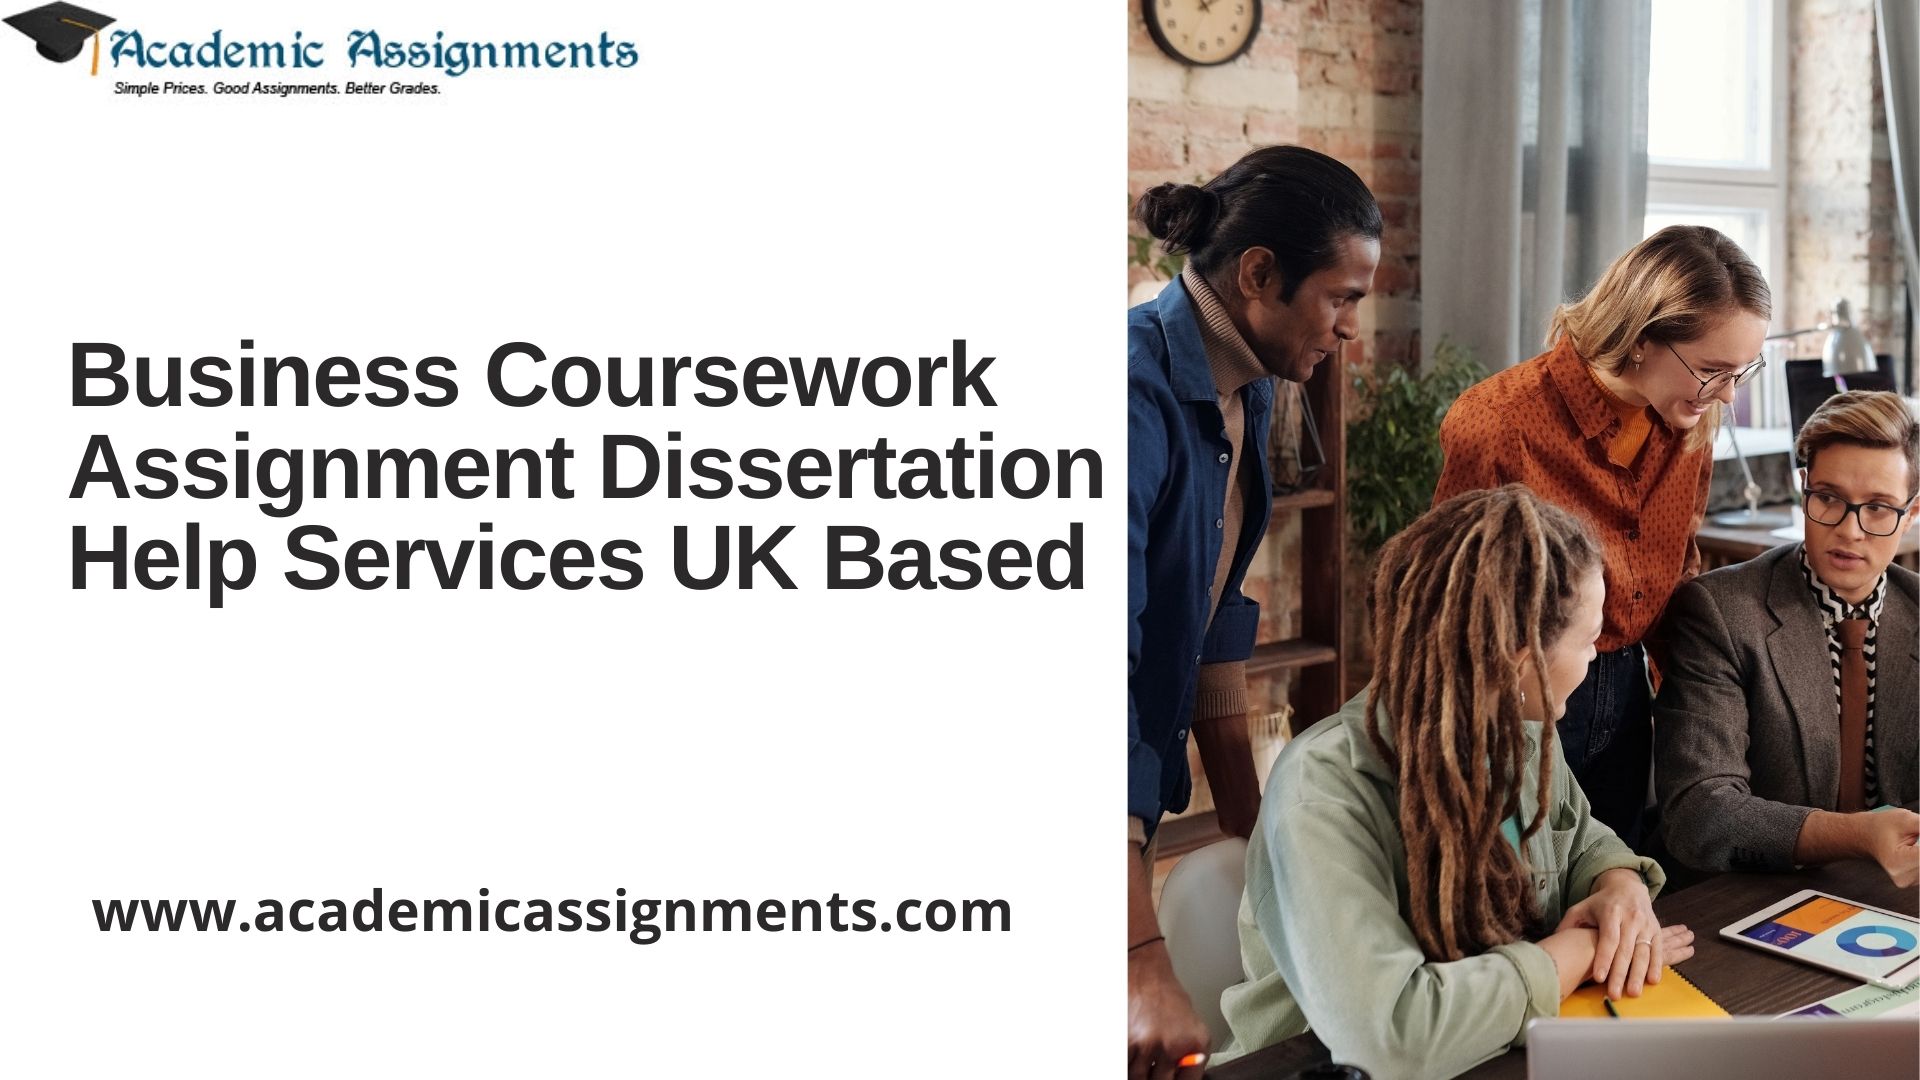 Business Coursework Assignment Dissertation Help Services UK Based